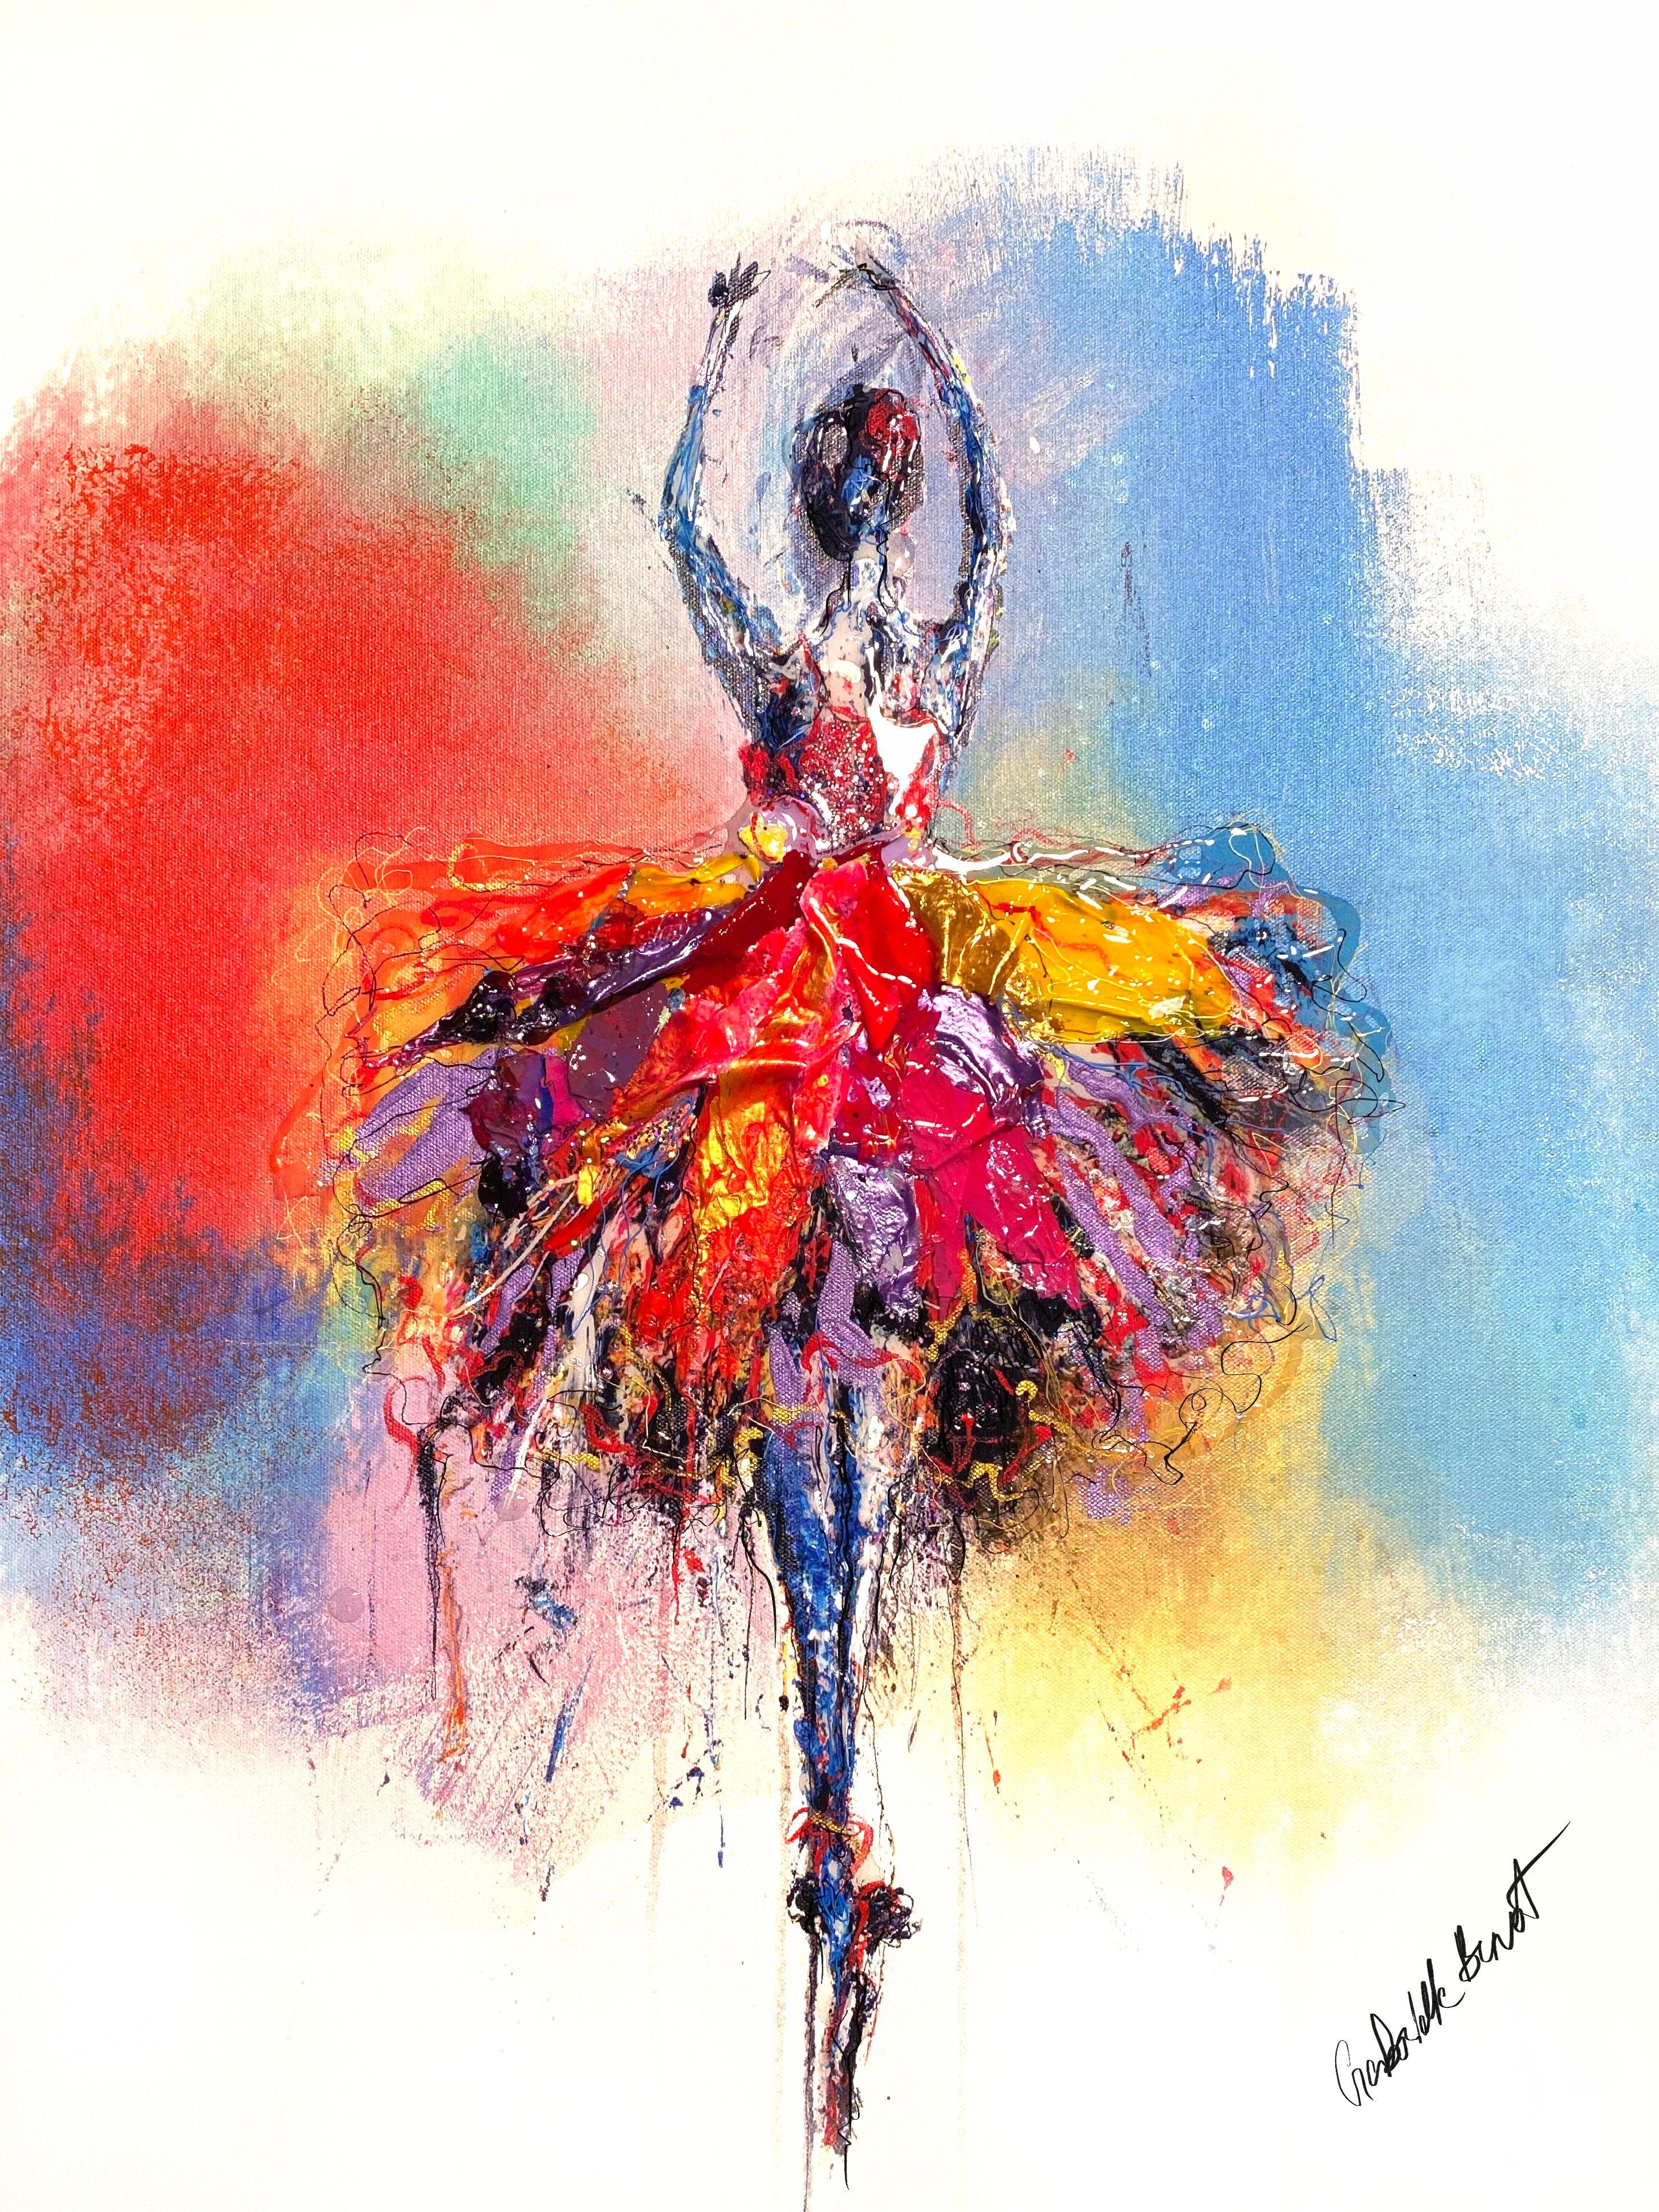 This abstract figurative painting, "Etoile" by artist Gabrielle Benot is a 30x24 original mixed media painting on canvas.  Depicted is a colorful abstract ballet dancer in passe on pointe with arms in fifth position.  To create a three dimensional